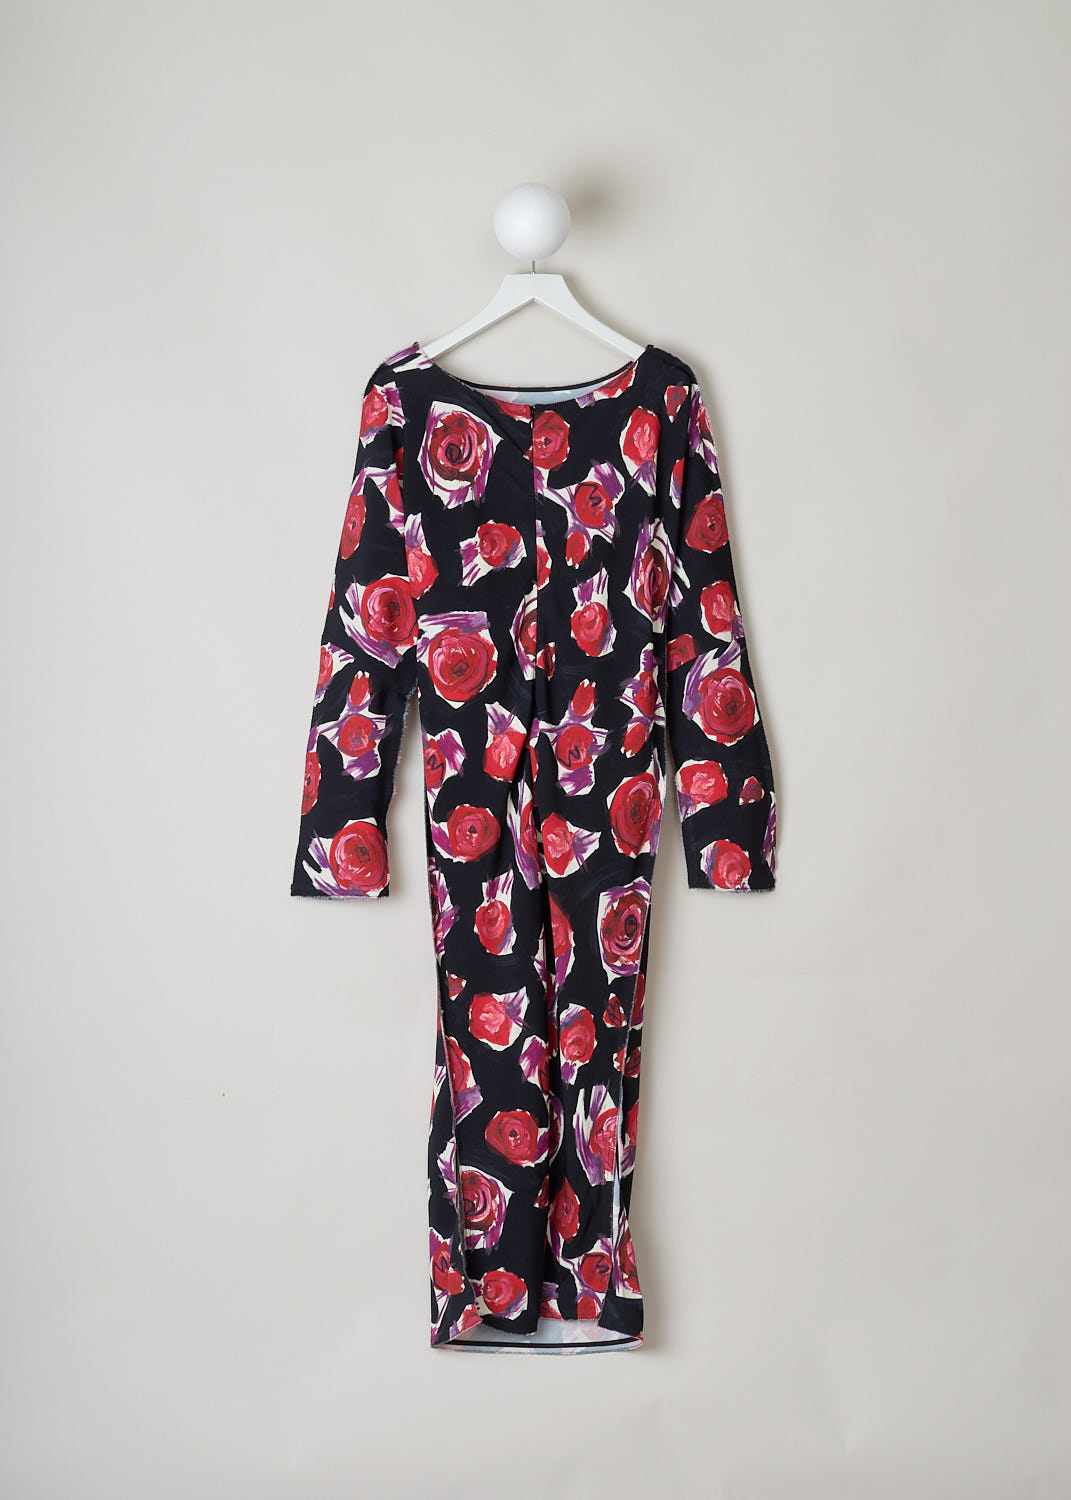 MARNI, ROSE PRINTED MAXI DRESS, ABMA0857A0_UTV908_SRN99, Black, Print, Back, This long sleeve maxi dress has an all-over rose print. The dress features a boat neckline and has a raw hemline throughout. The dress has slits on the sleeves and on the sides of the skirt. In the back, a concealed centre zip functions as closure option.
